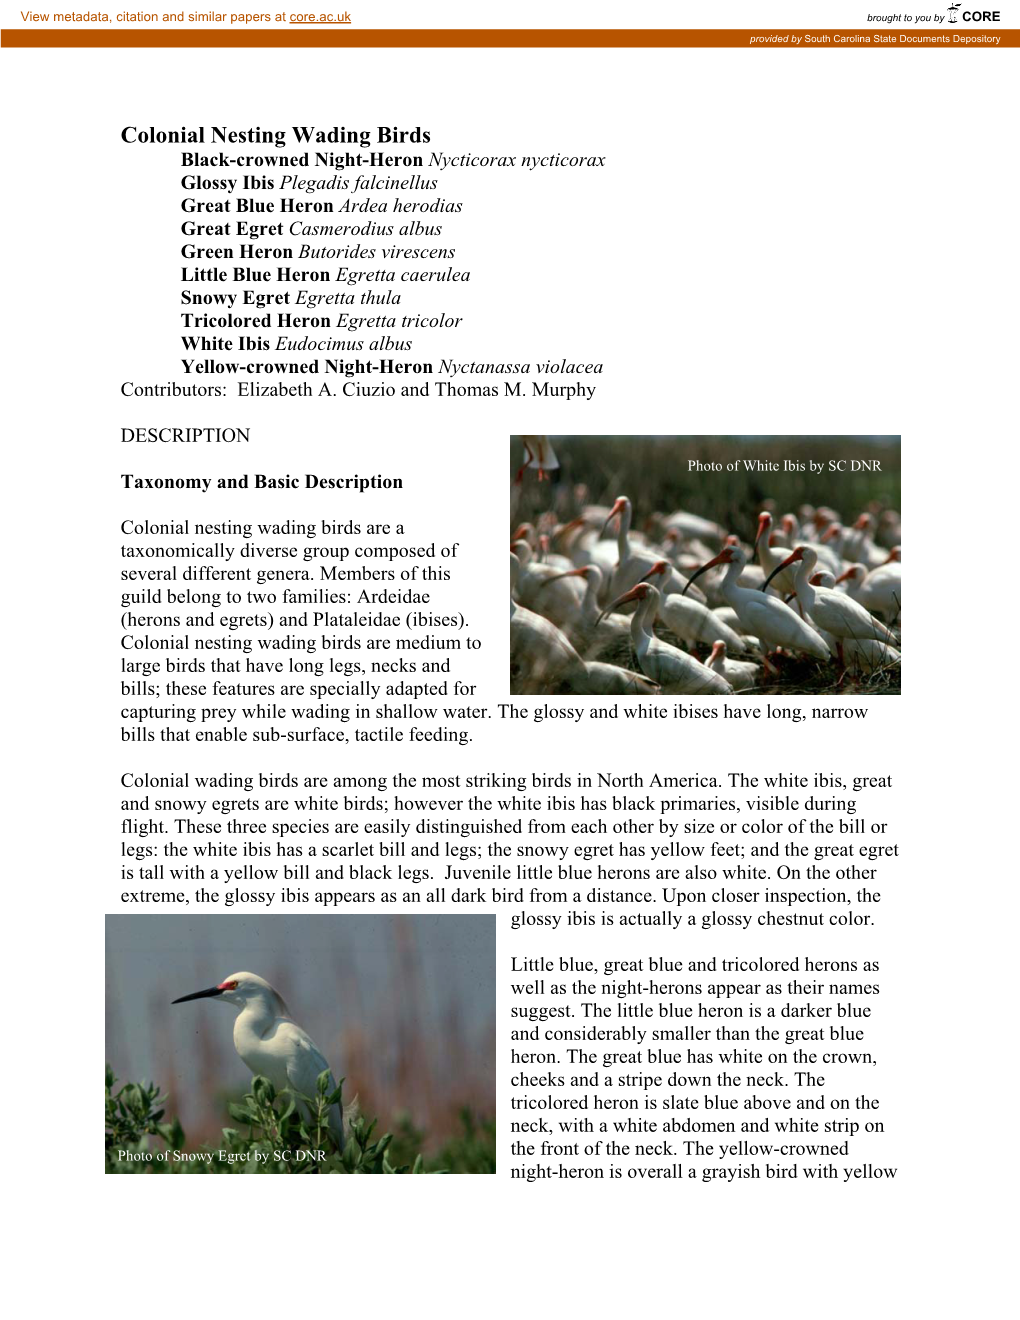 Colonial Nesting Wading Birds